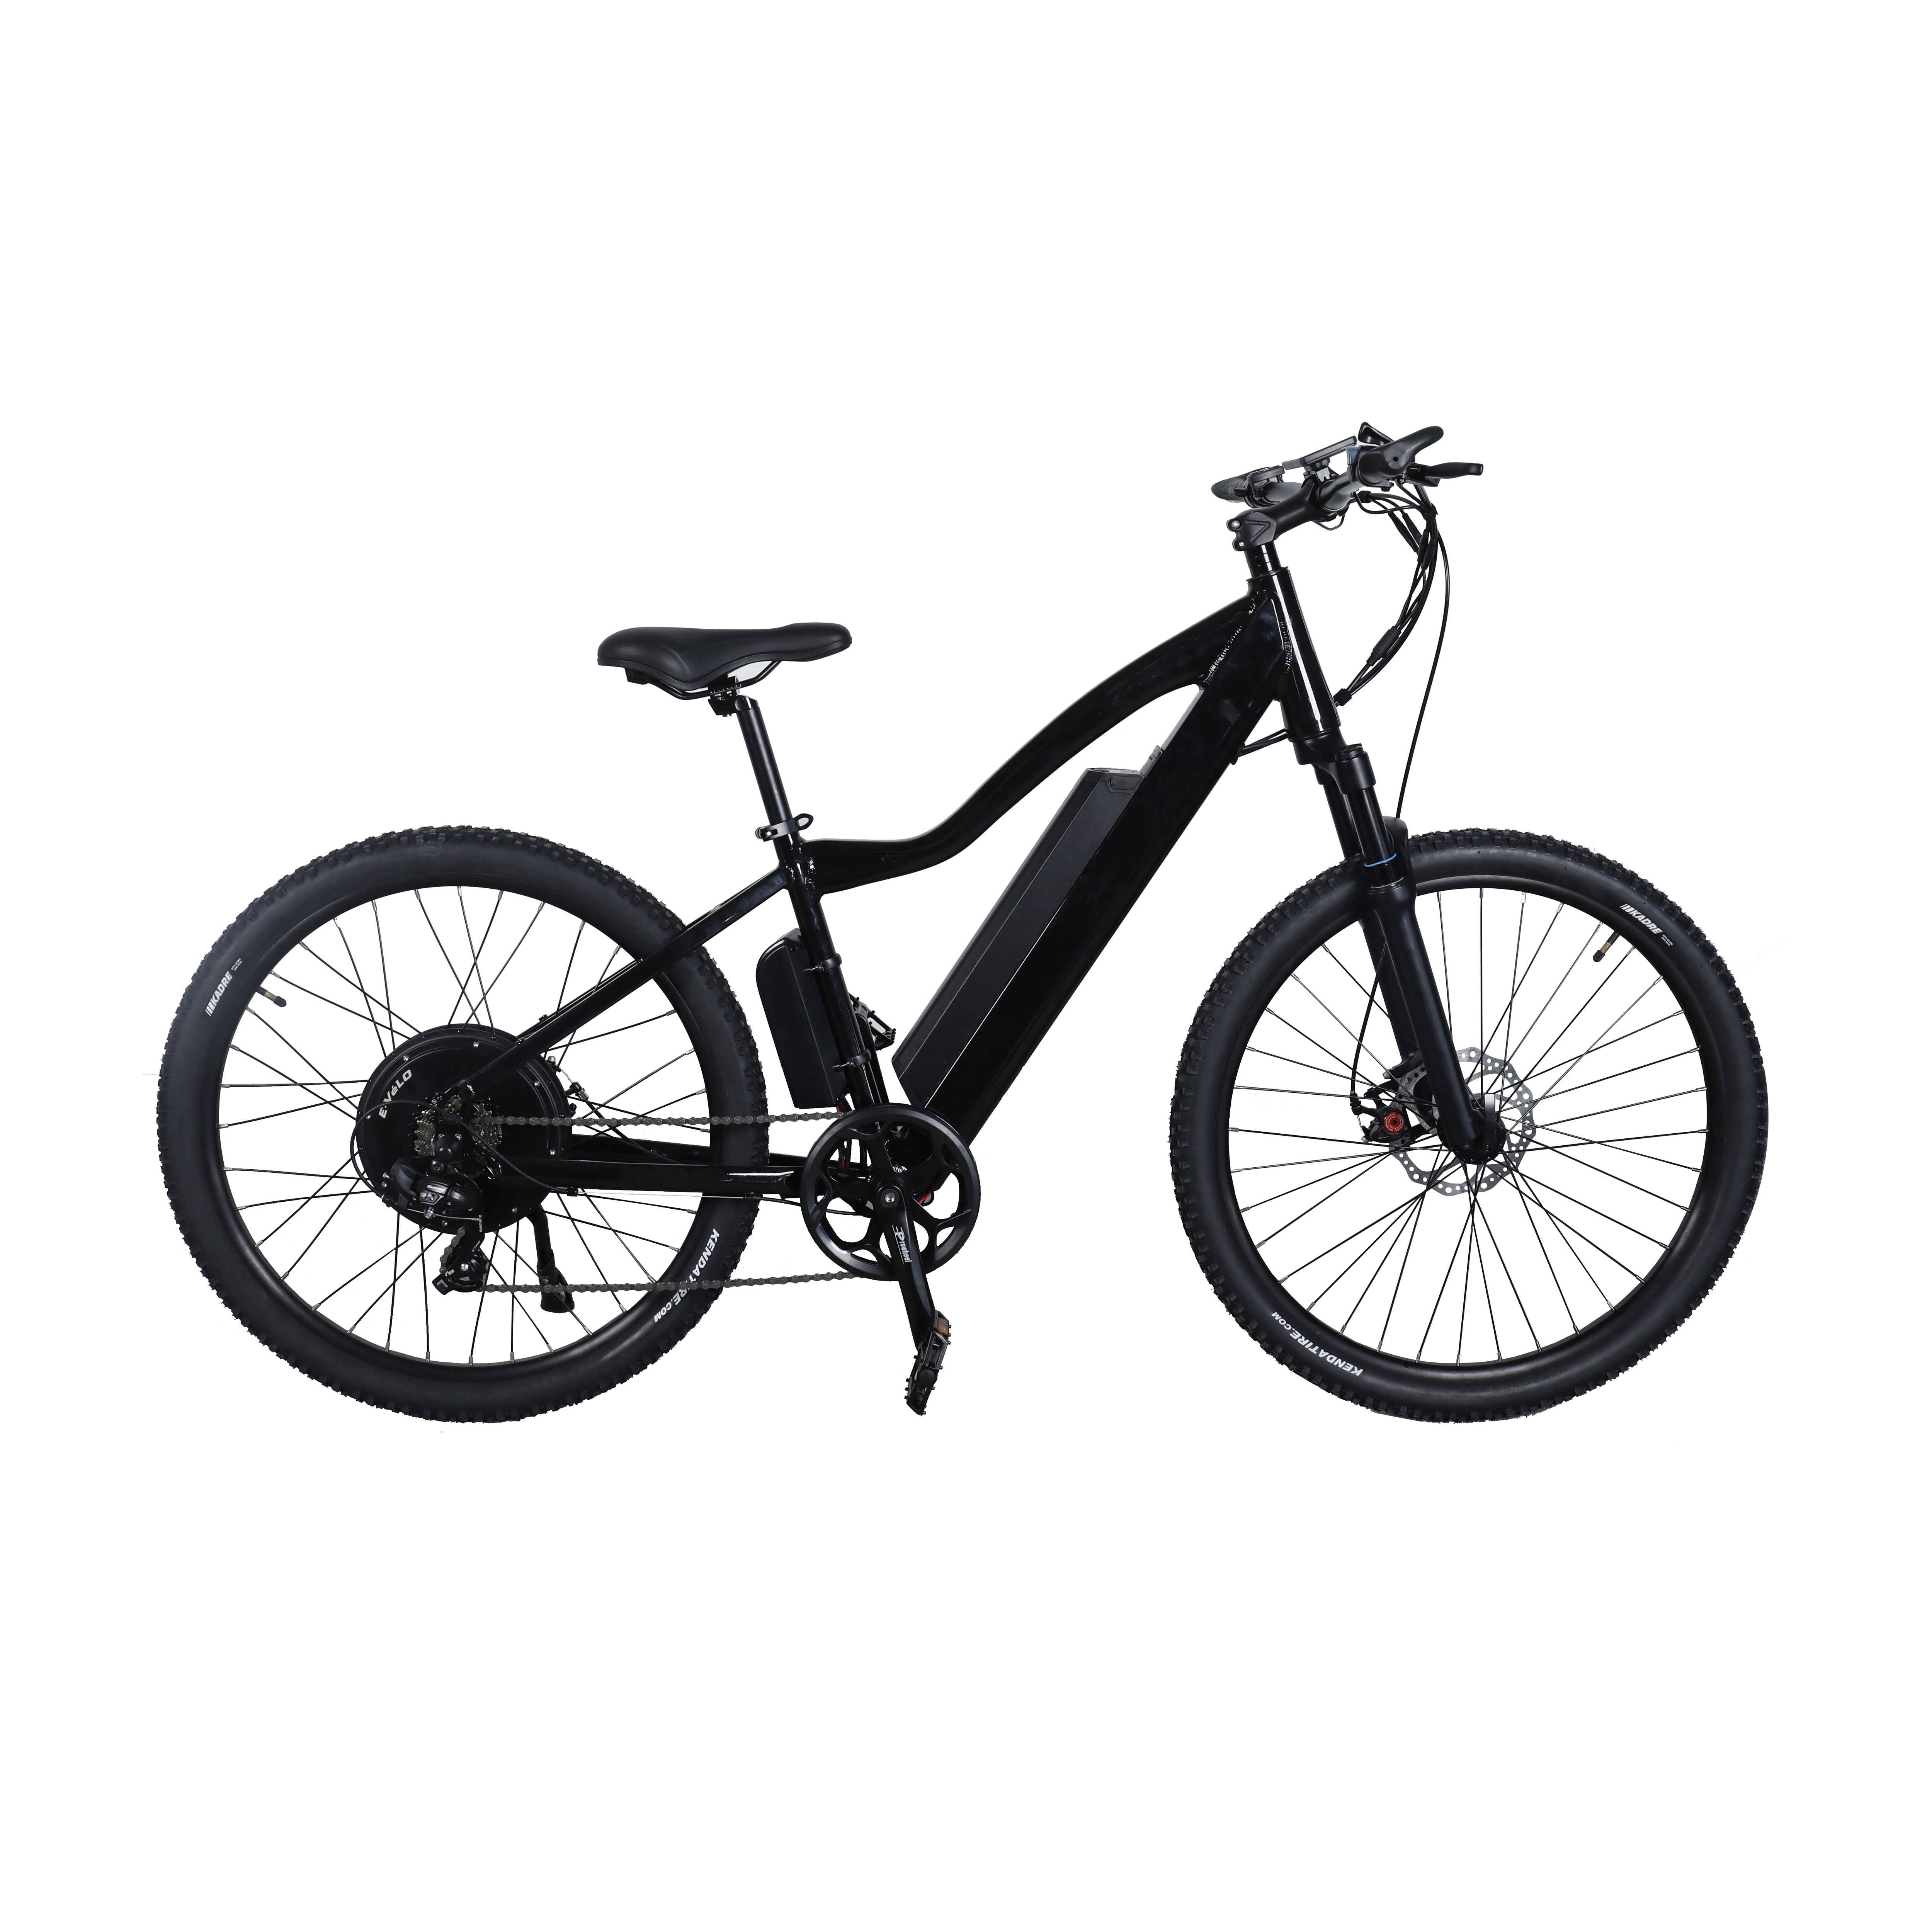 Fat tire electric bicycle: should I buy one?